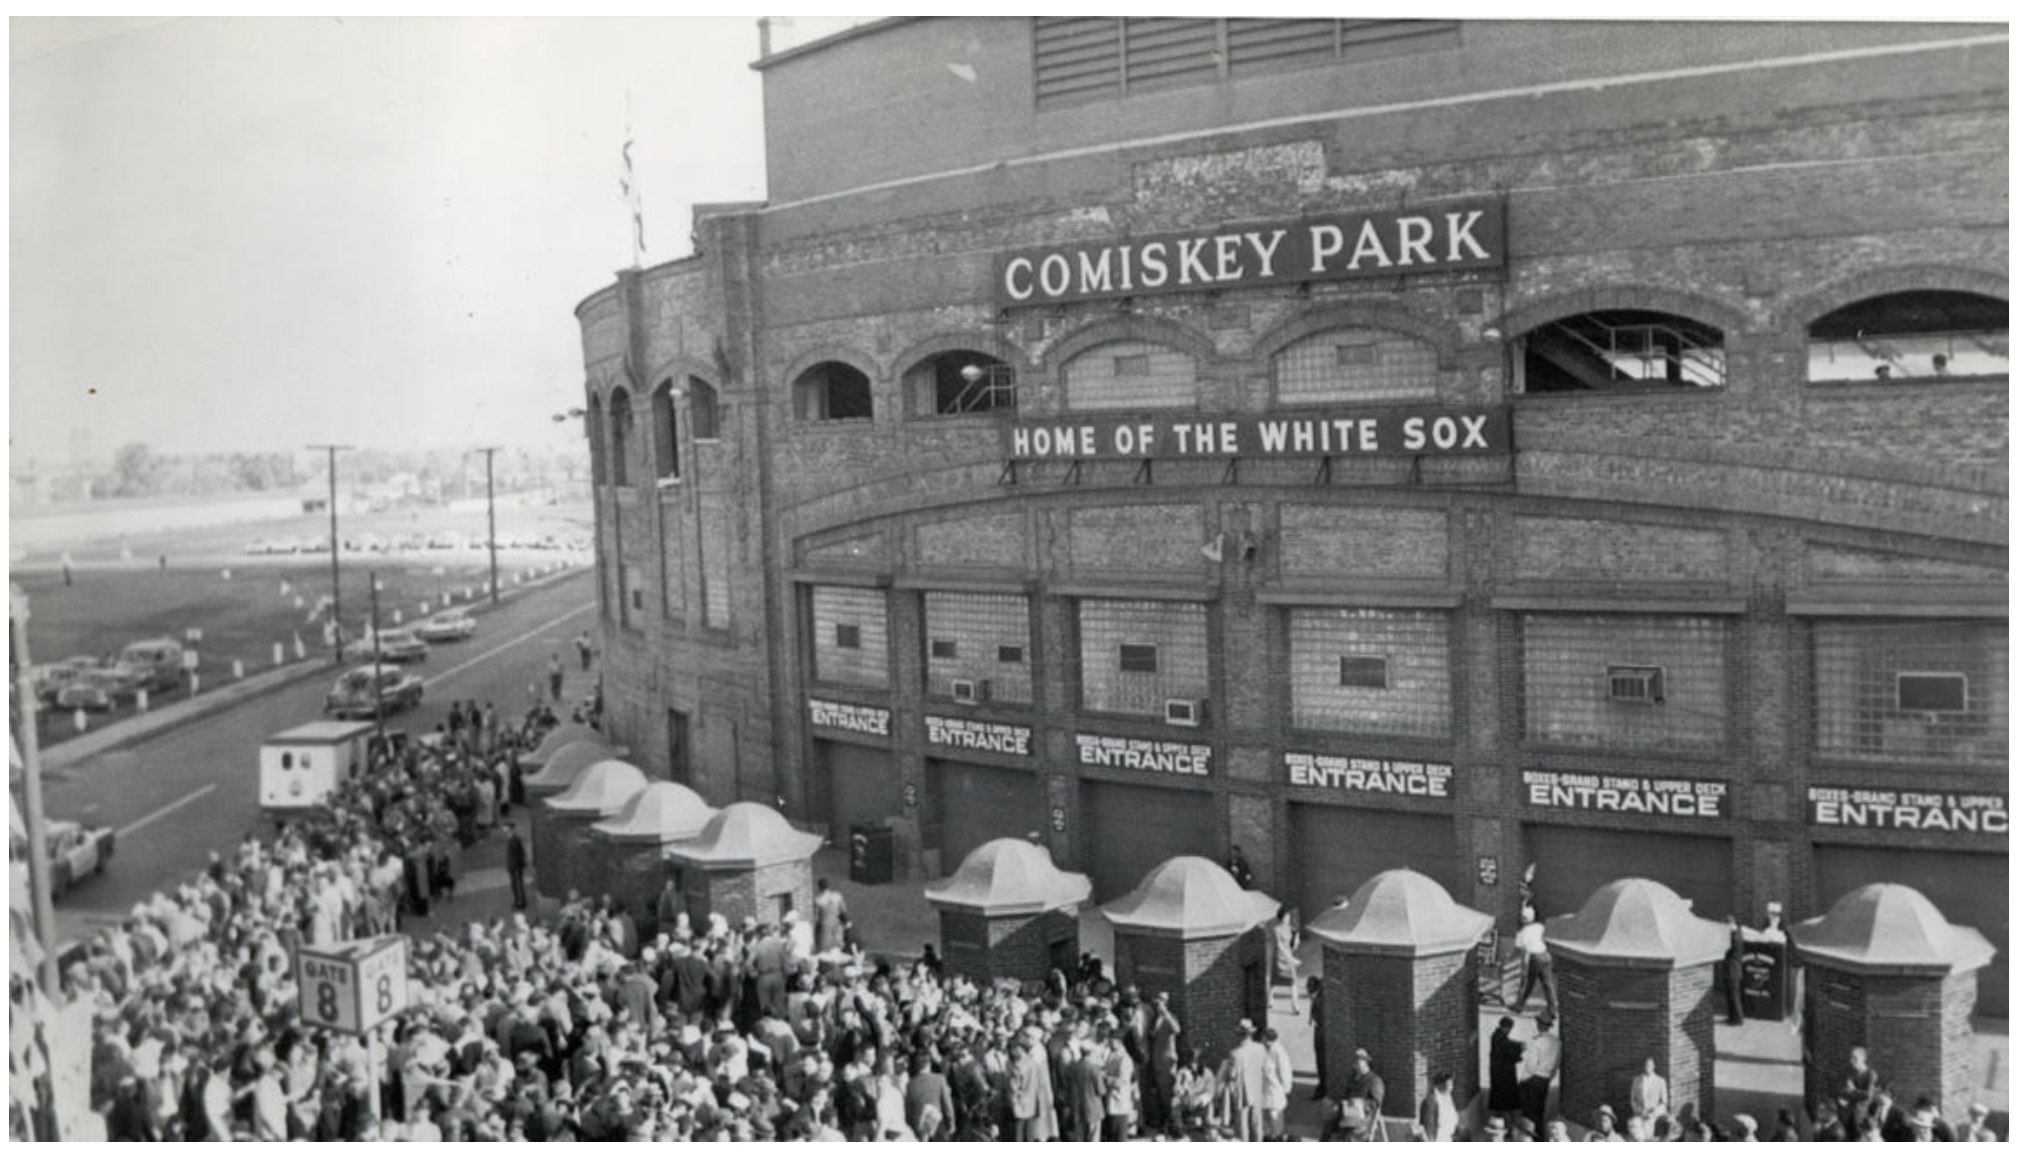  The views outside the old Comisky Park on 35th and Sheilds were all too familiar to Darrel where the Chicago White Sox won the 1959 World Series. 